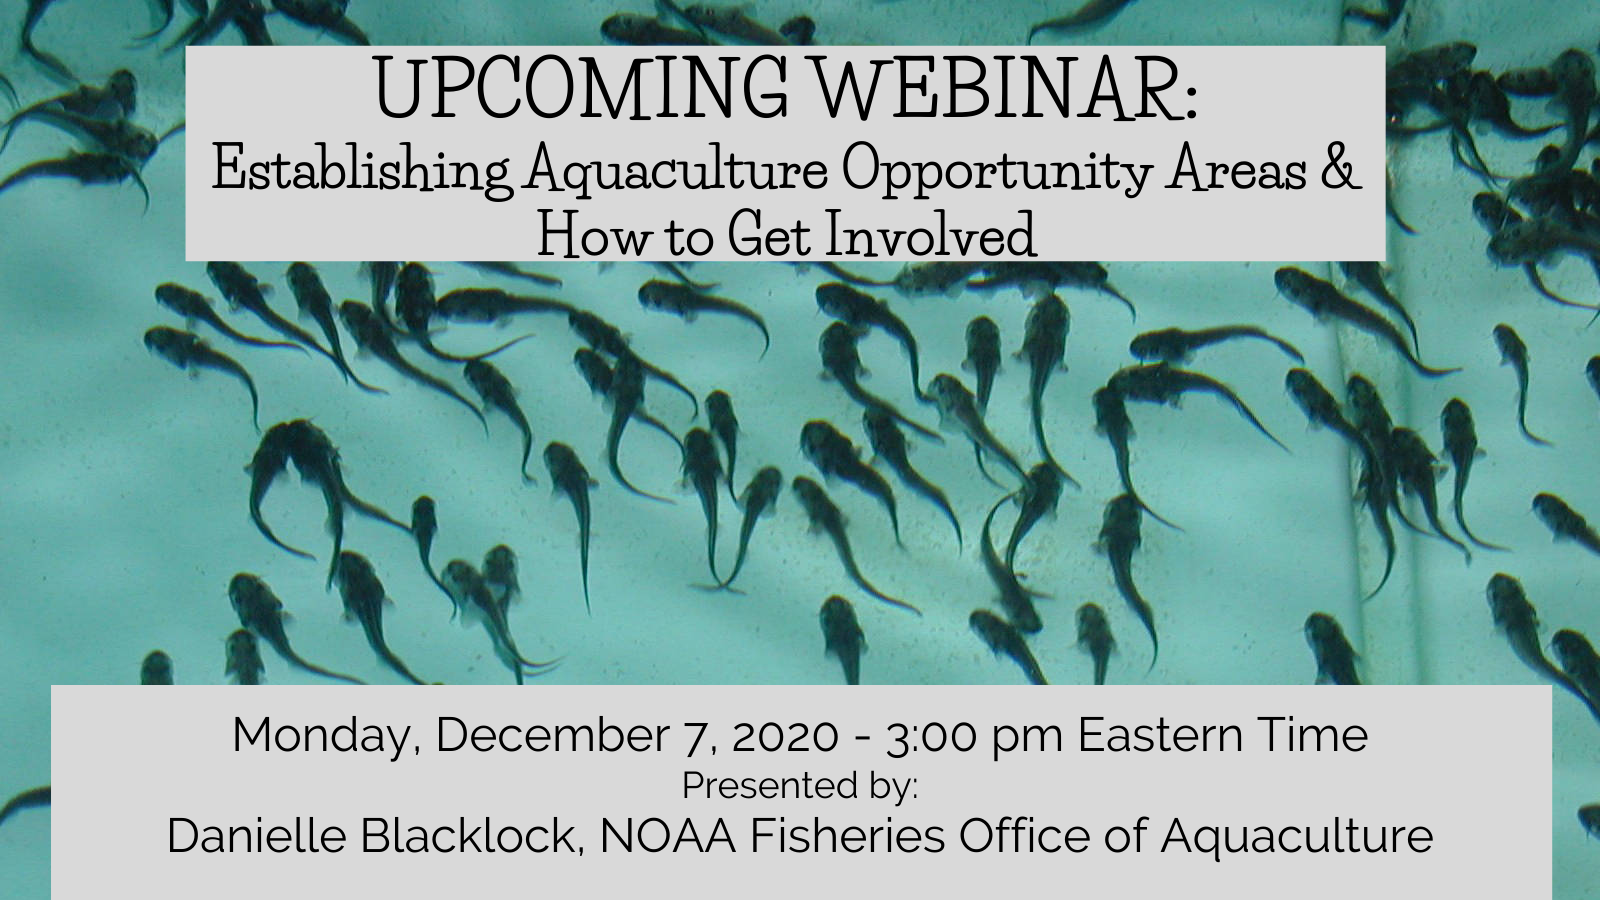 RECORDING: Webinar on Establishing Aquaculture Opportunity Areas and How to Get Involved